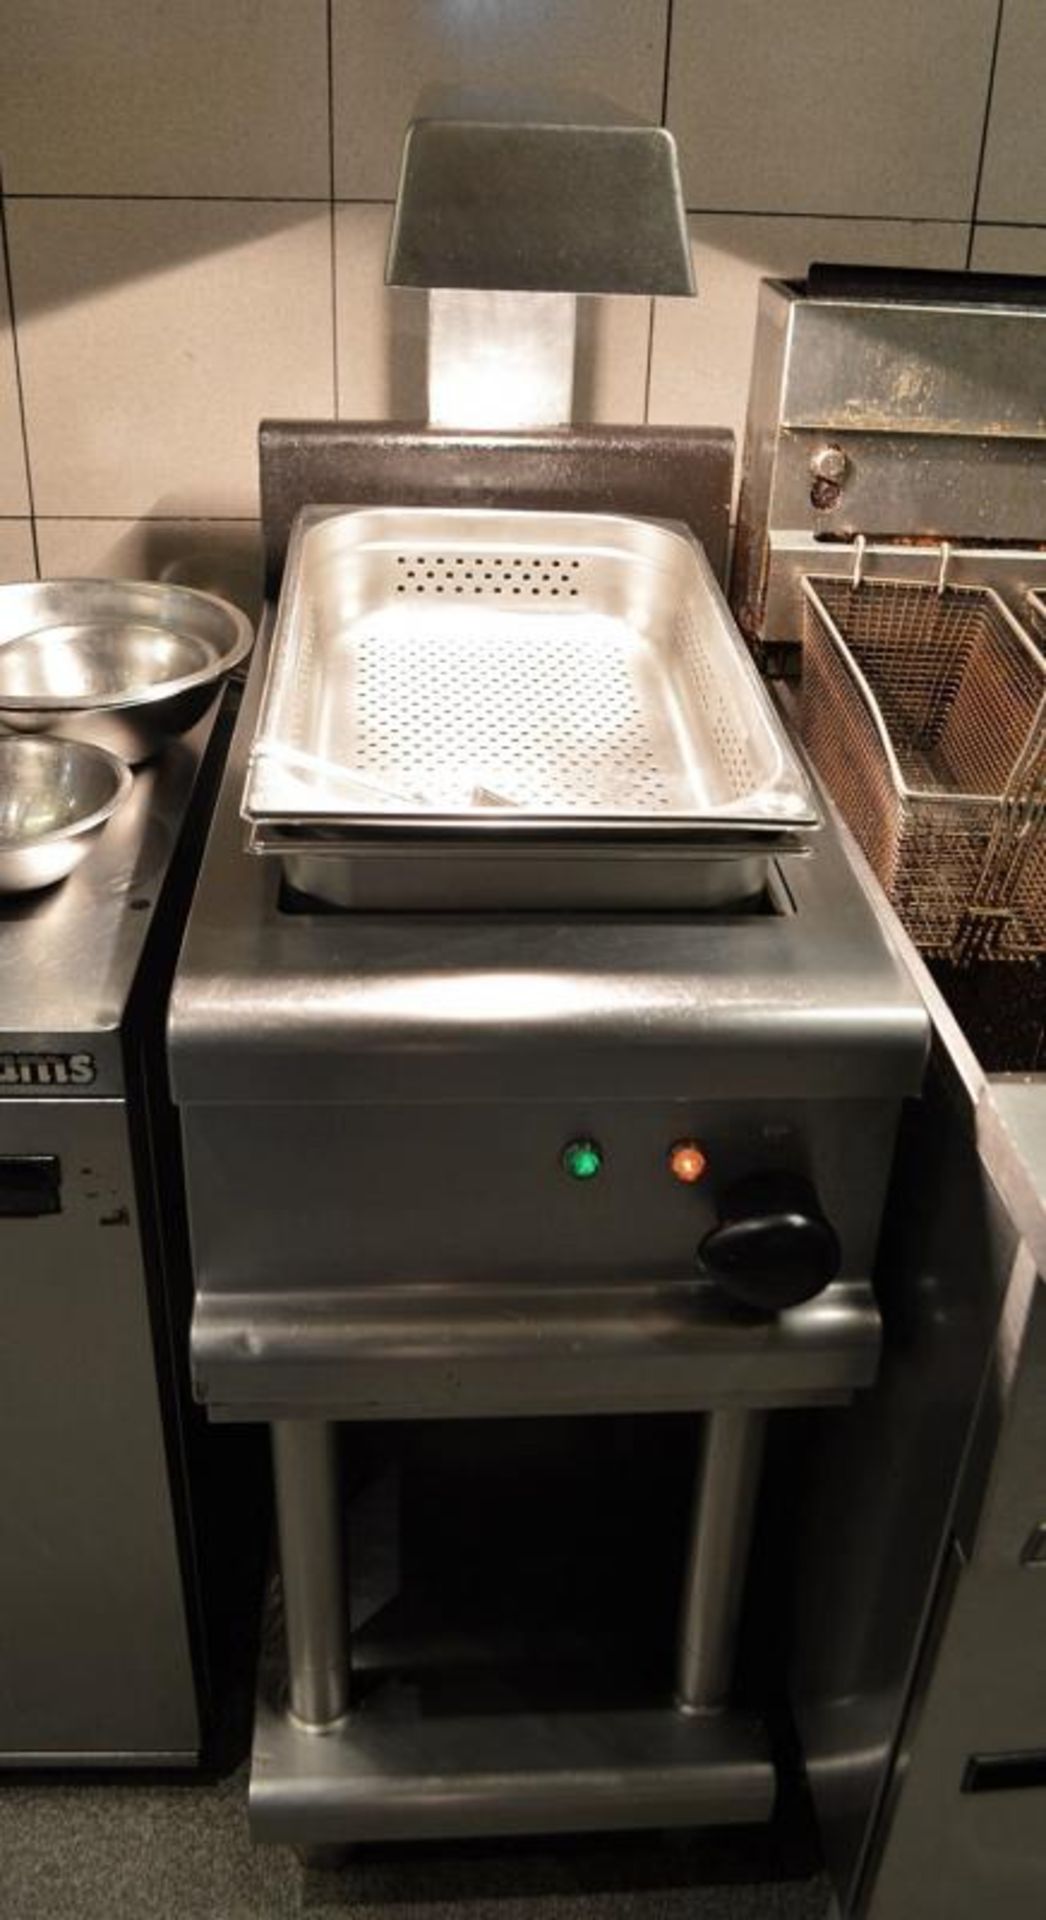 1 x Commercial Stainless Steel Chip Warmer - Dimensions: H130 x W40 x D72cm - CL367 - Ref CQ-FB256 -